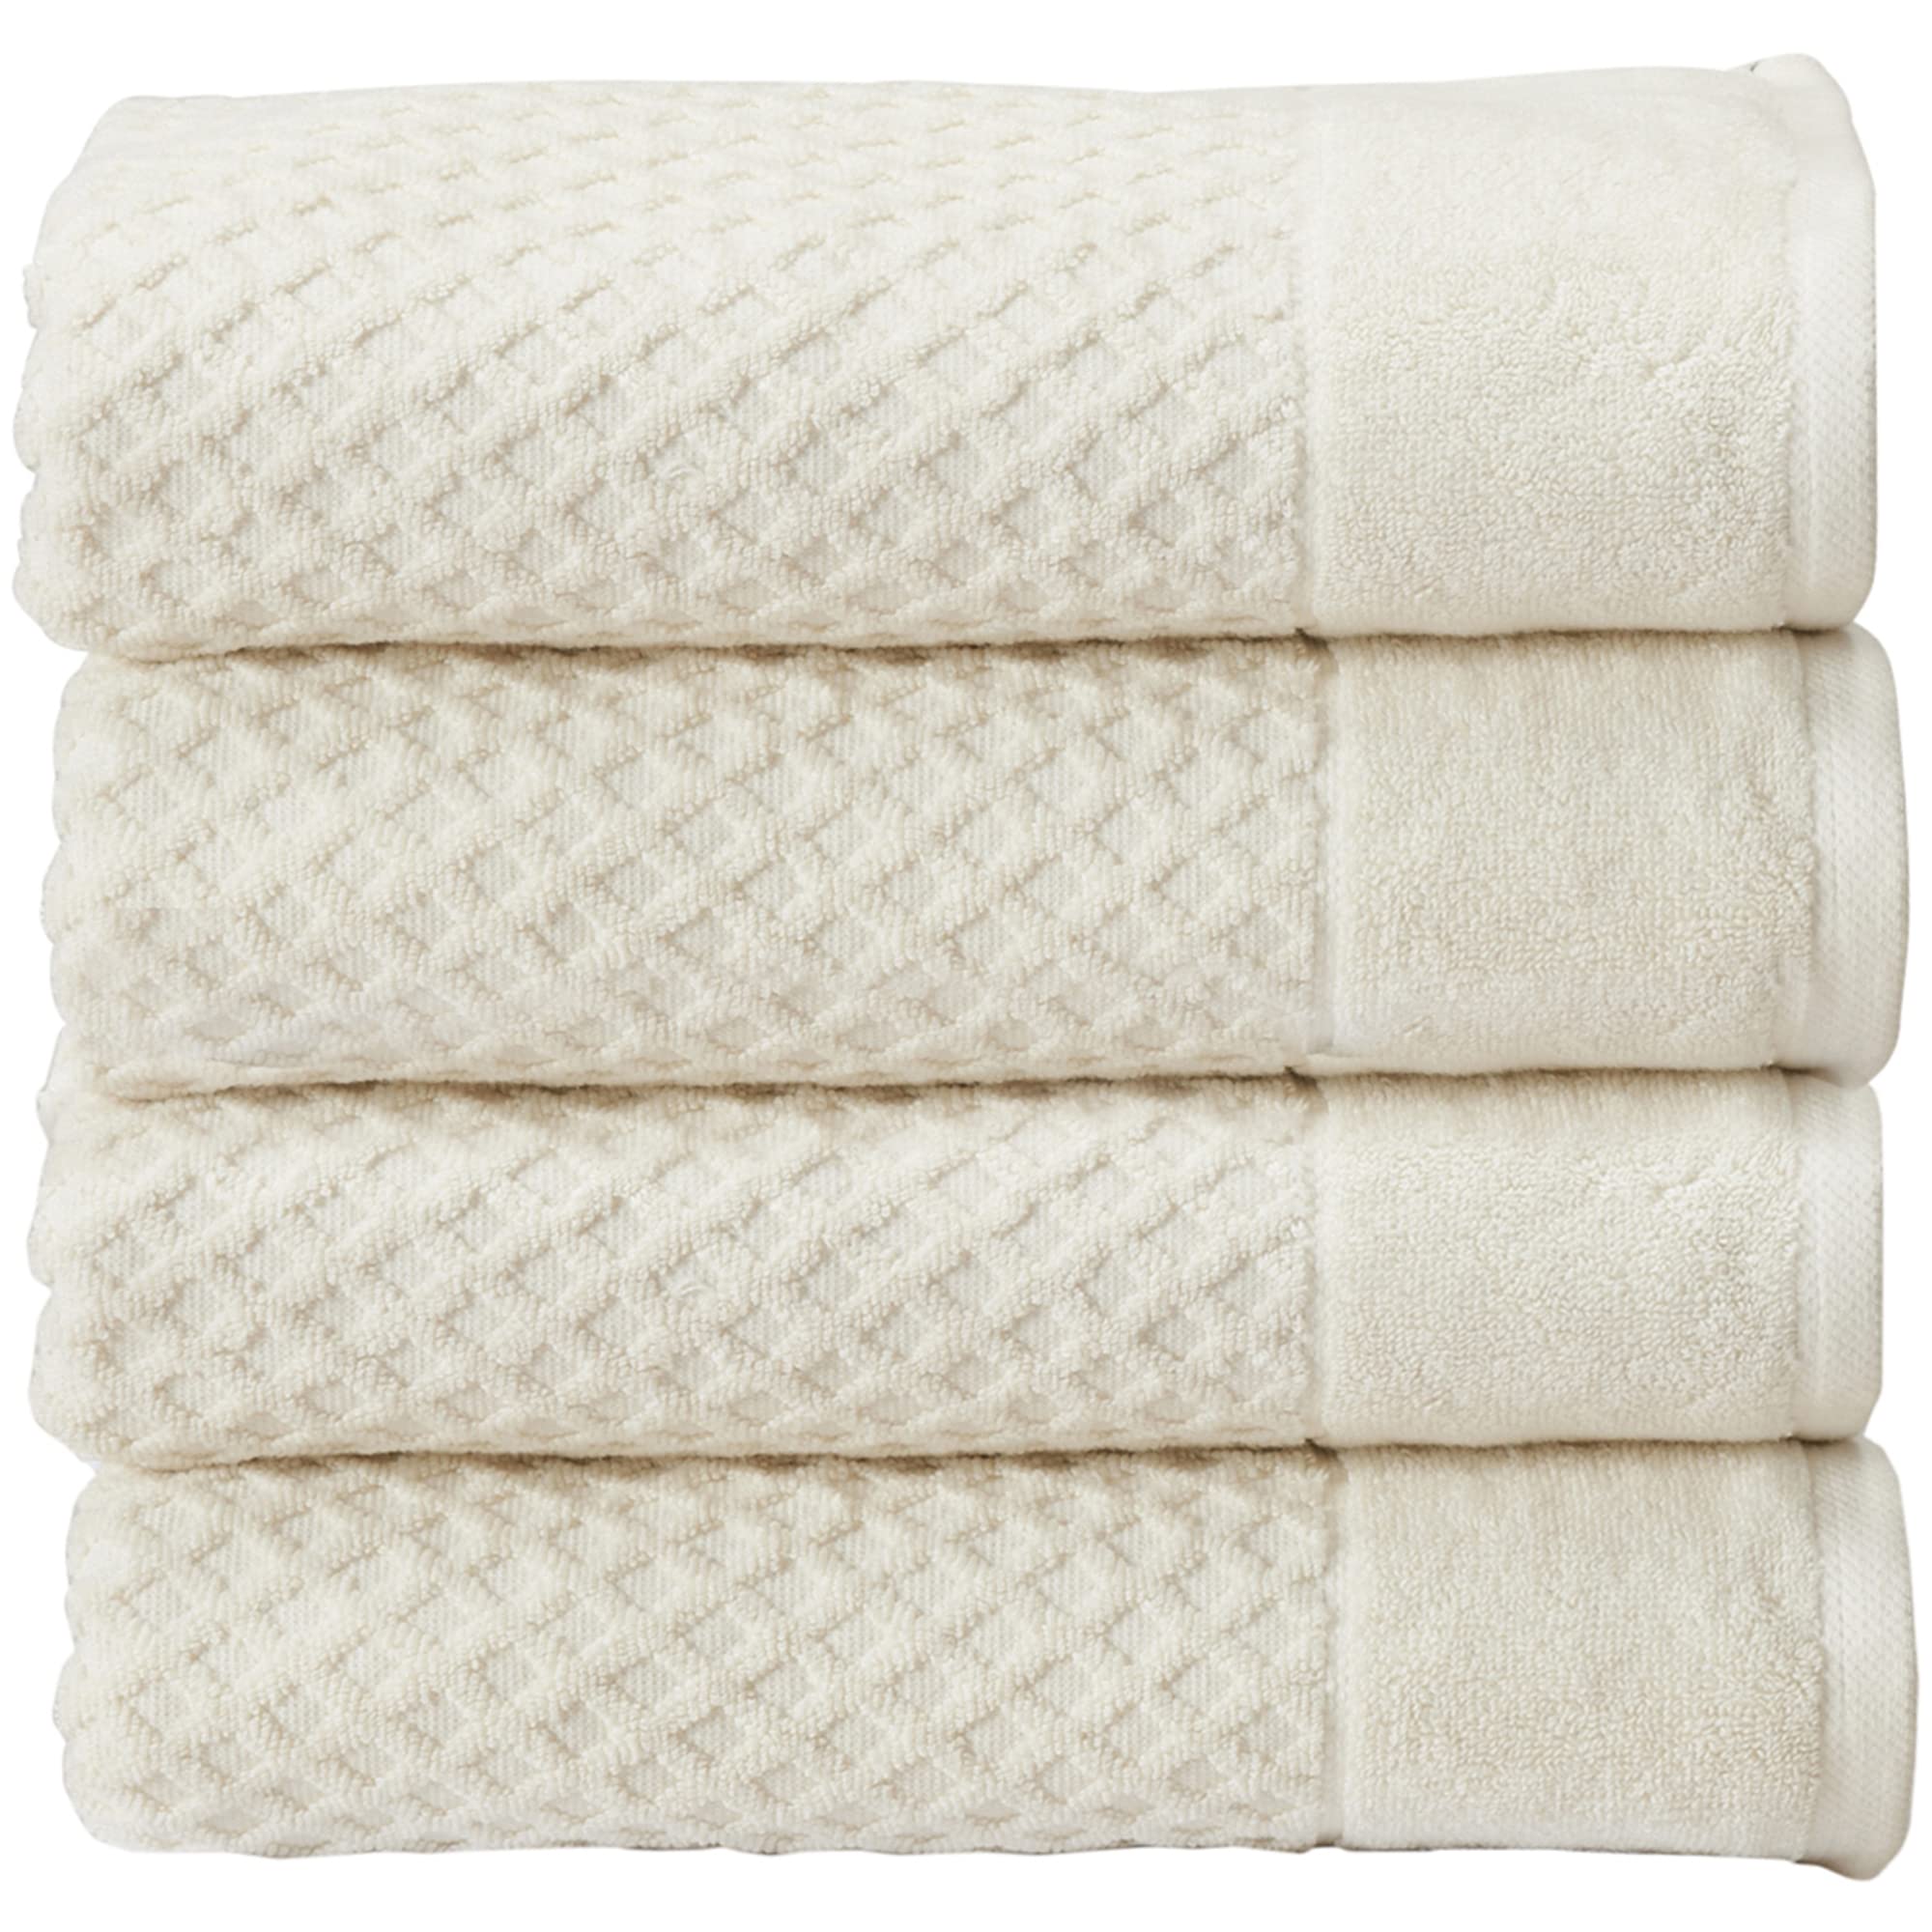 Great Bay Home 100 Cotton Beige Bath Towel Set 4 Soft Bath Towels (30 X 52 Inches) Highly Absorbent, Quick Dry Bath Towels Grays